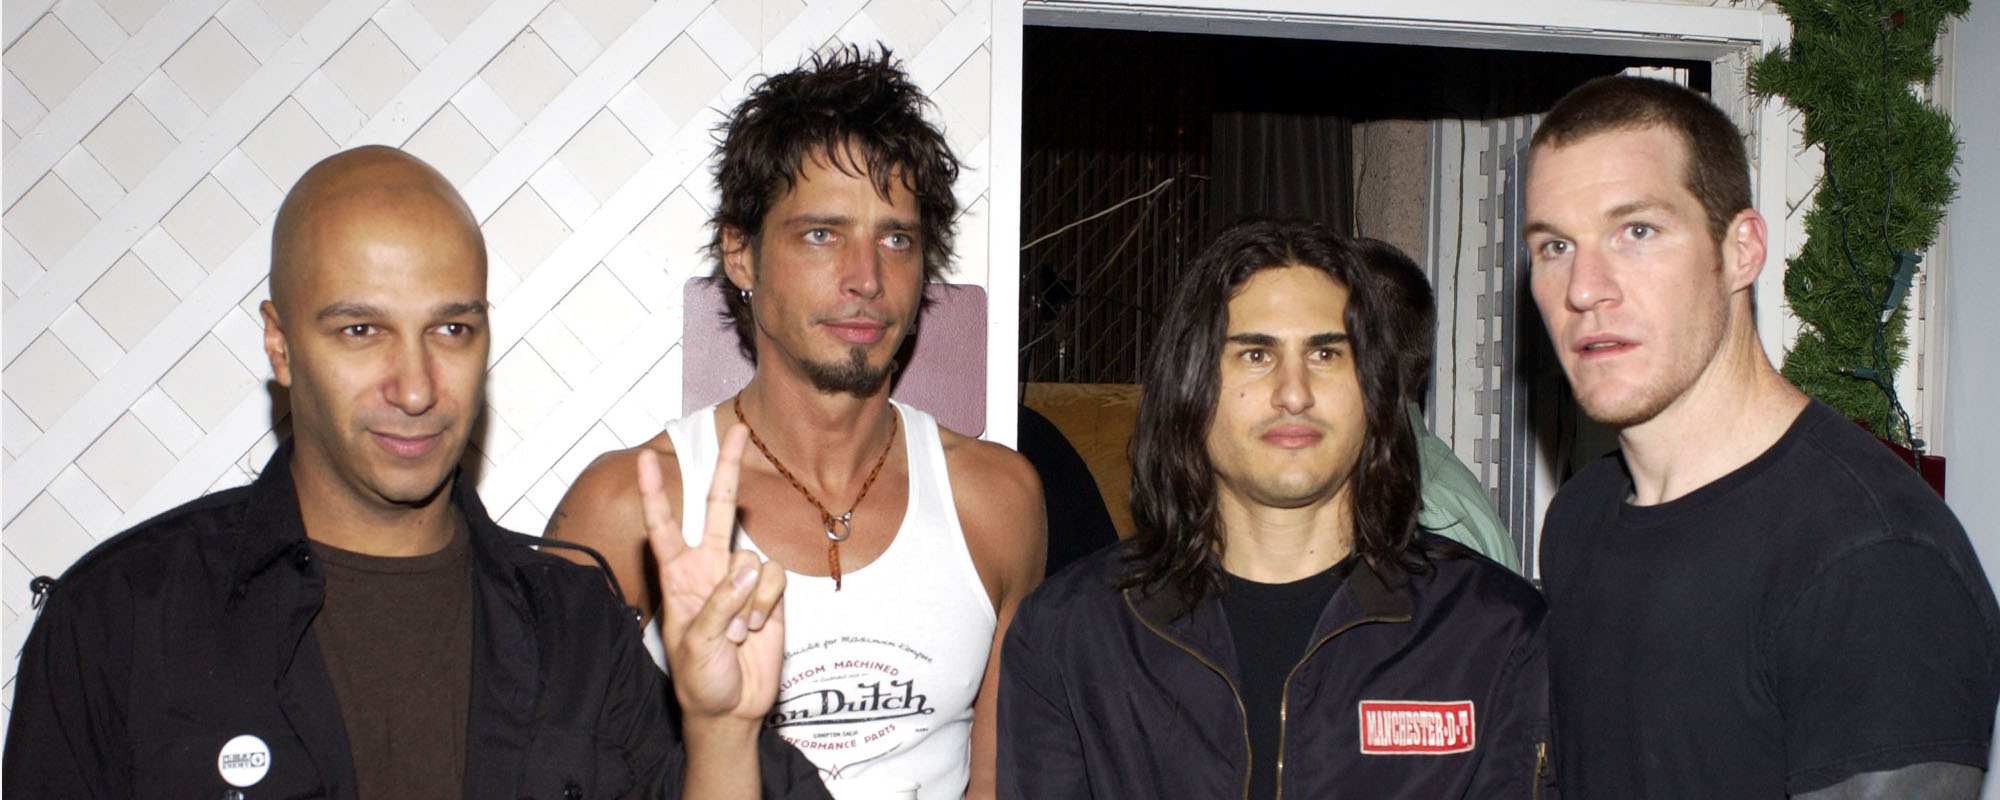 Behind the Meaning of the Powerful and Controversial Band Name Audioslave